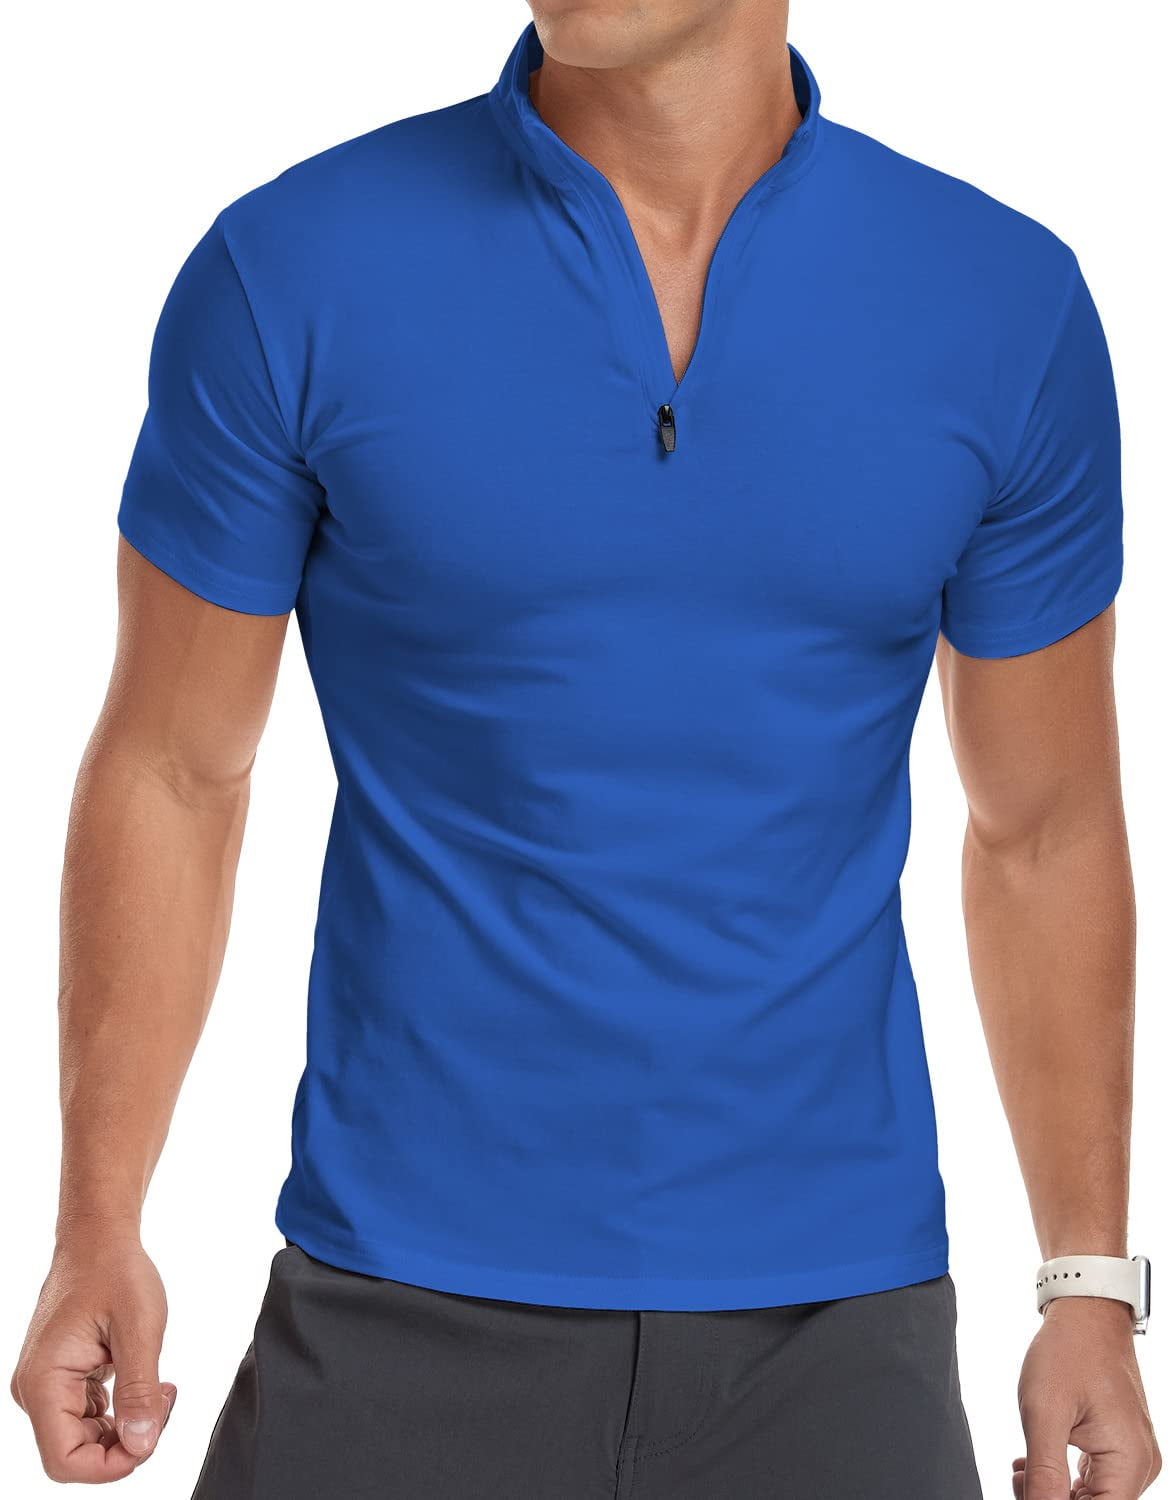 Buy online here First-class design and quality MLANM Men's Polo Shirt ...